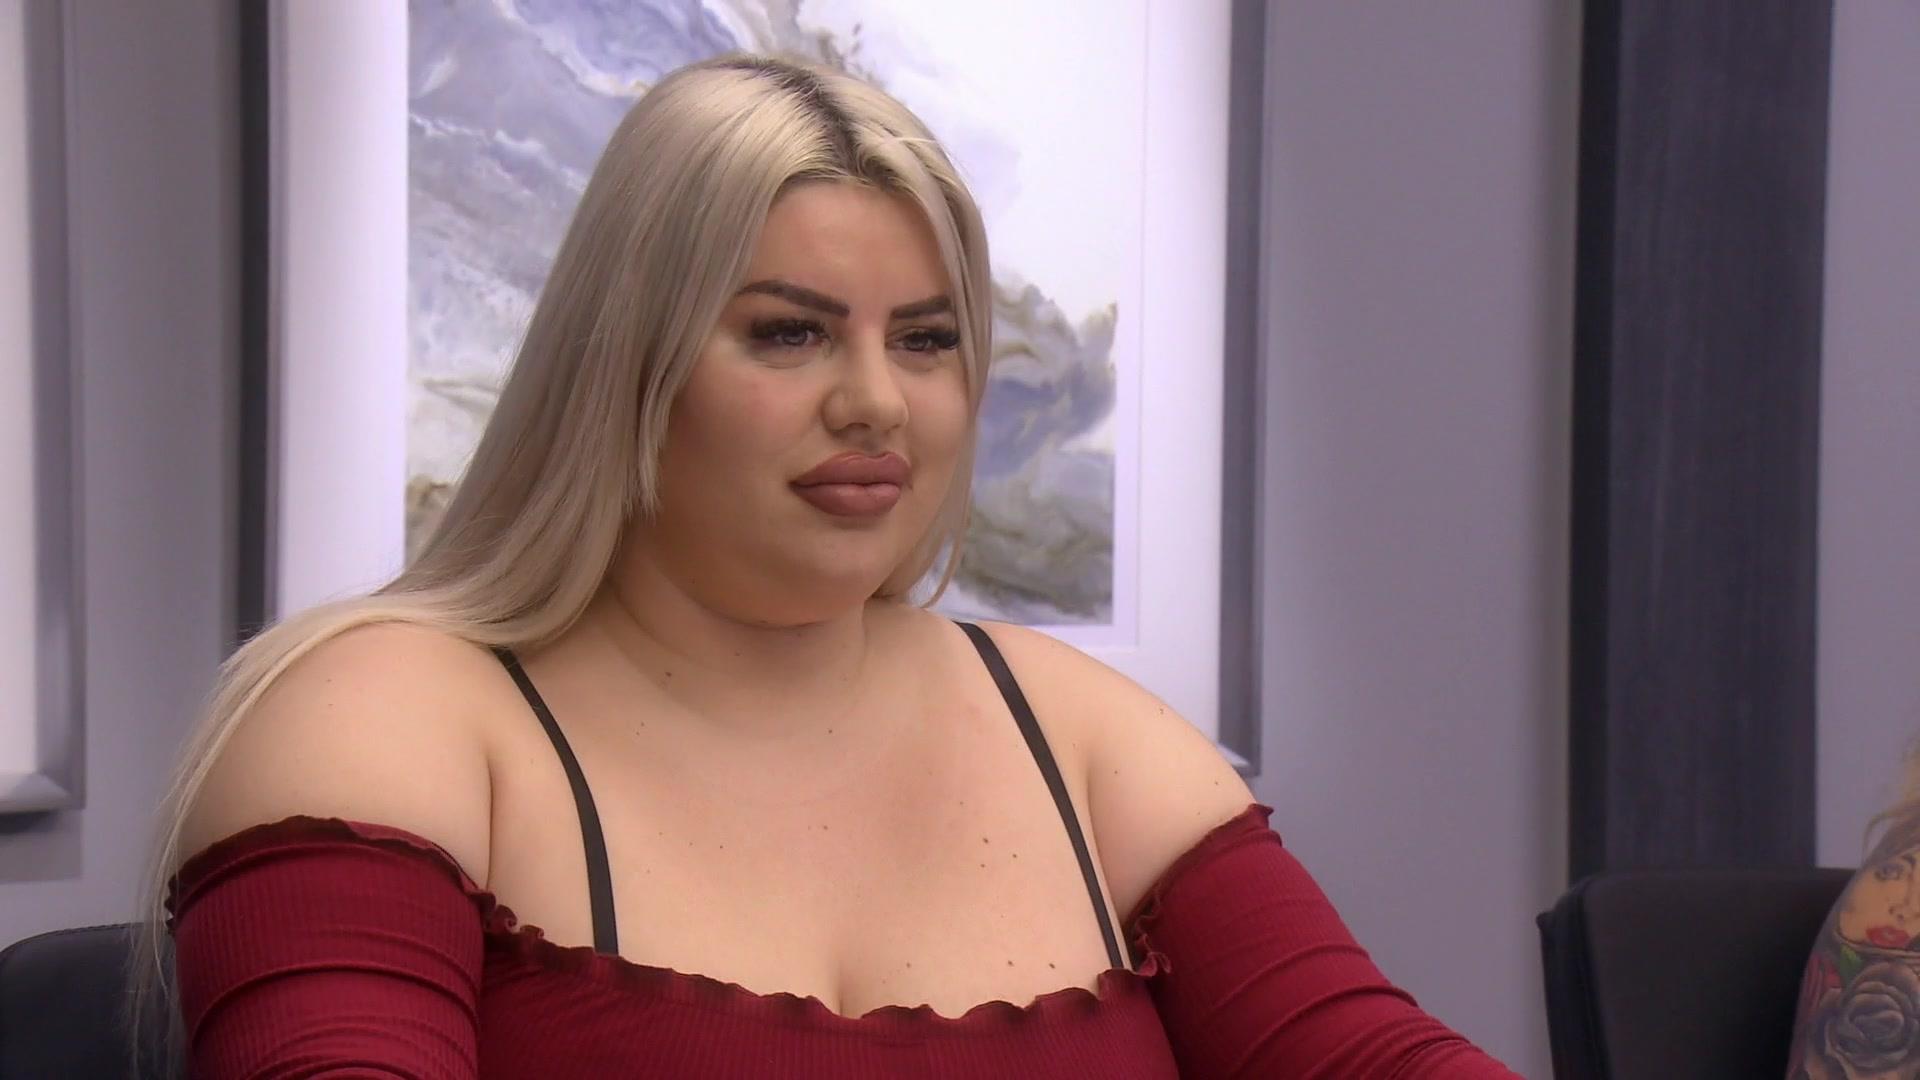 New Botched episode sees woman who has slimmed down by 10 inches